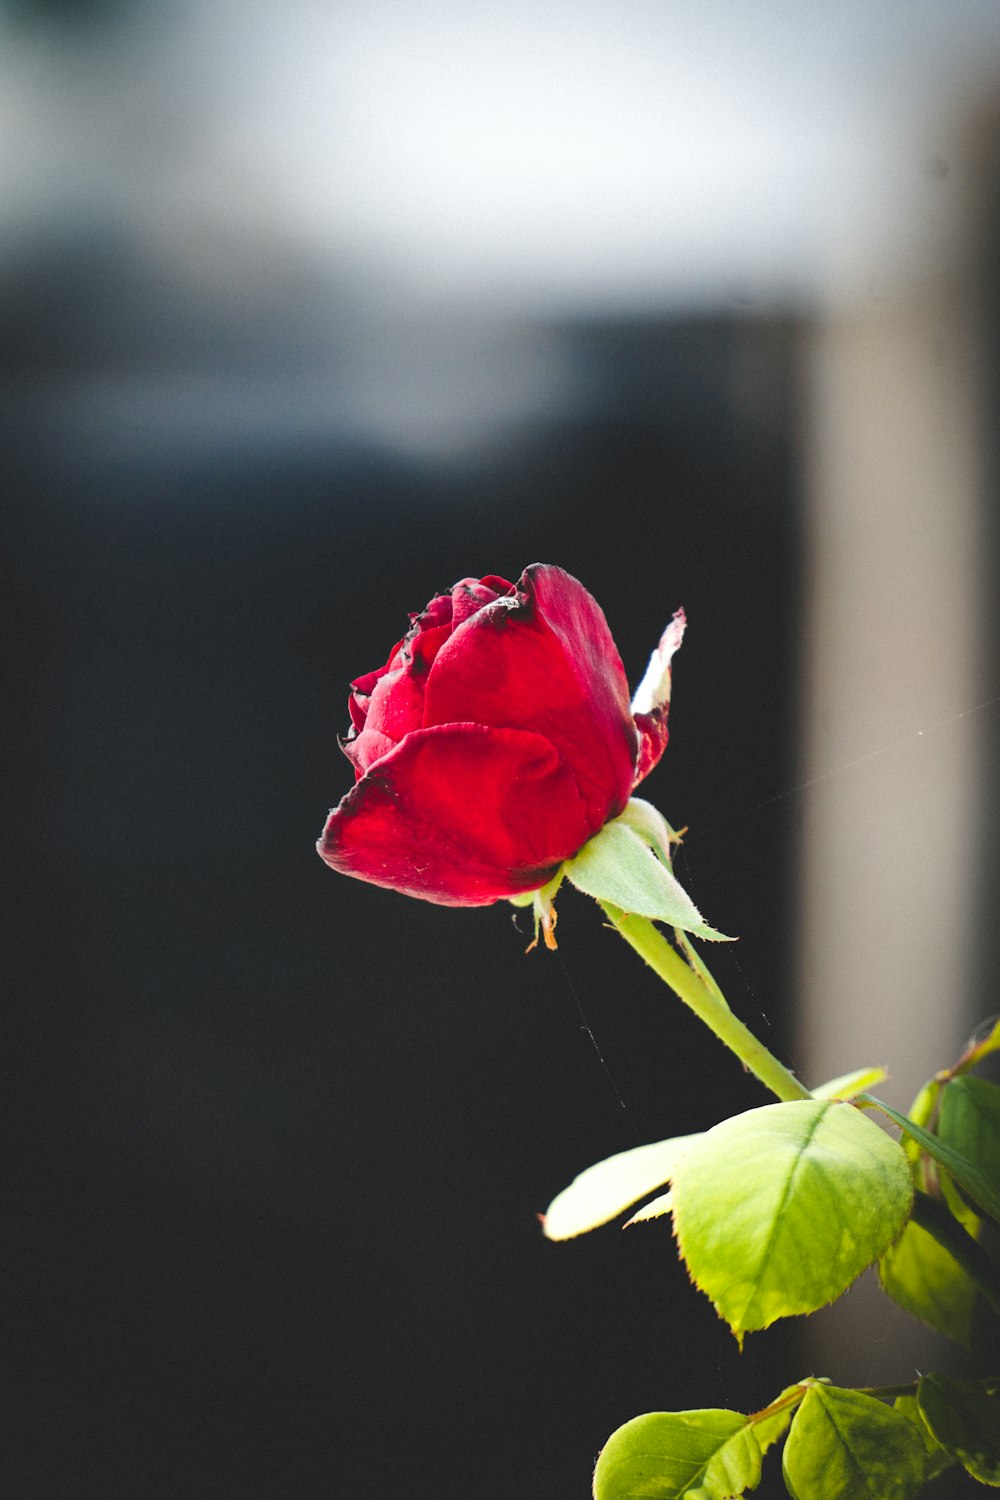 a single red rose with green leaves in a vase